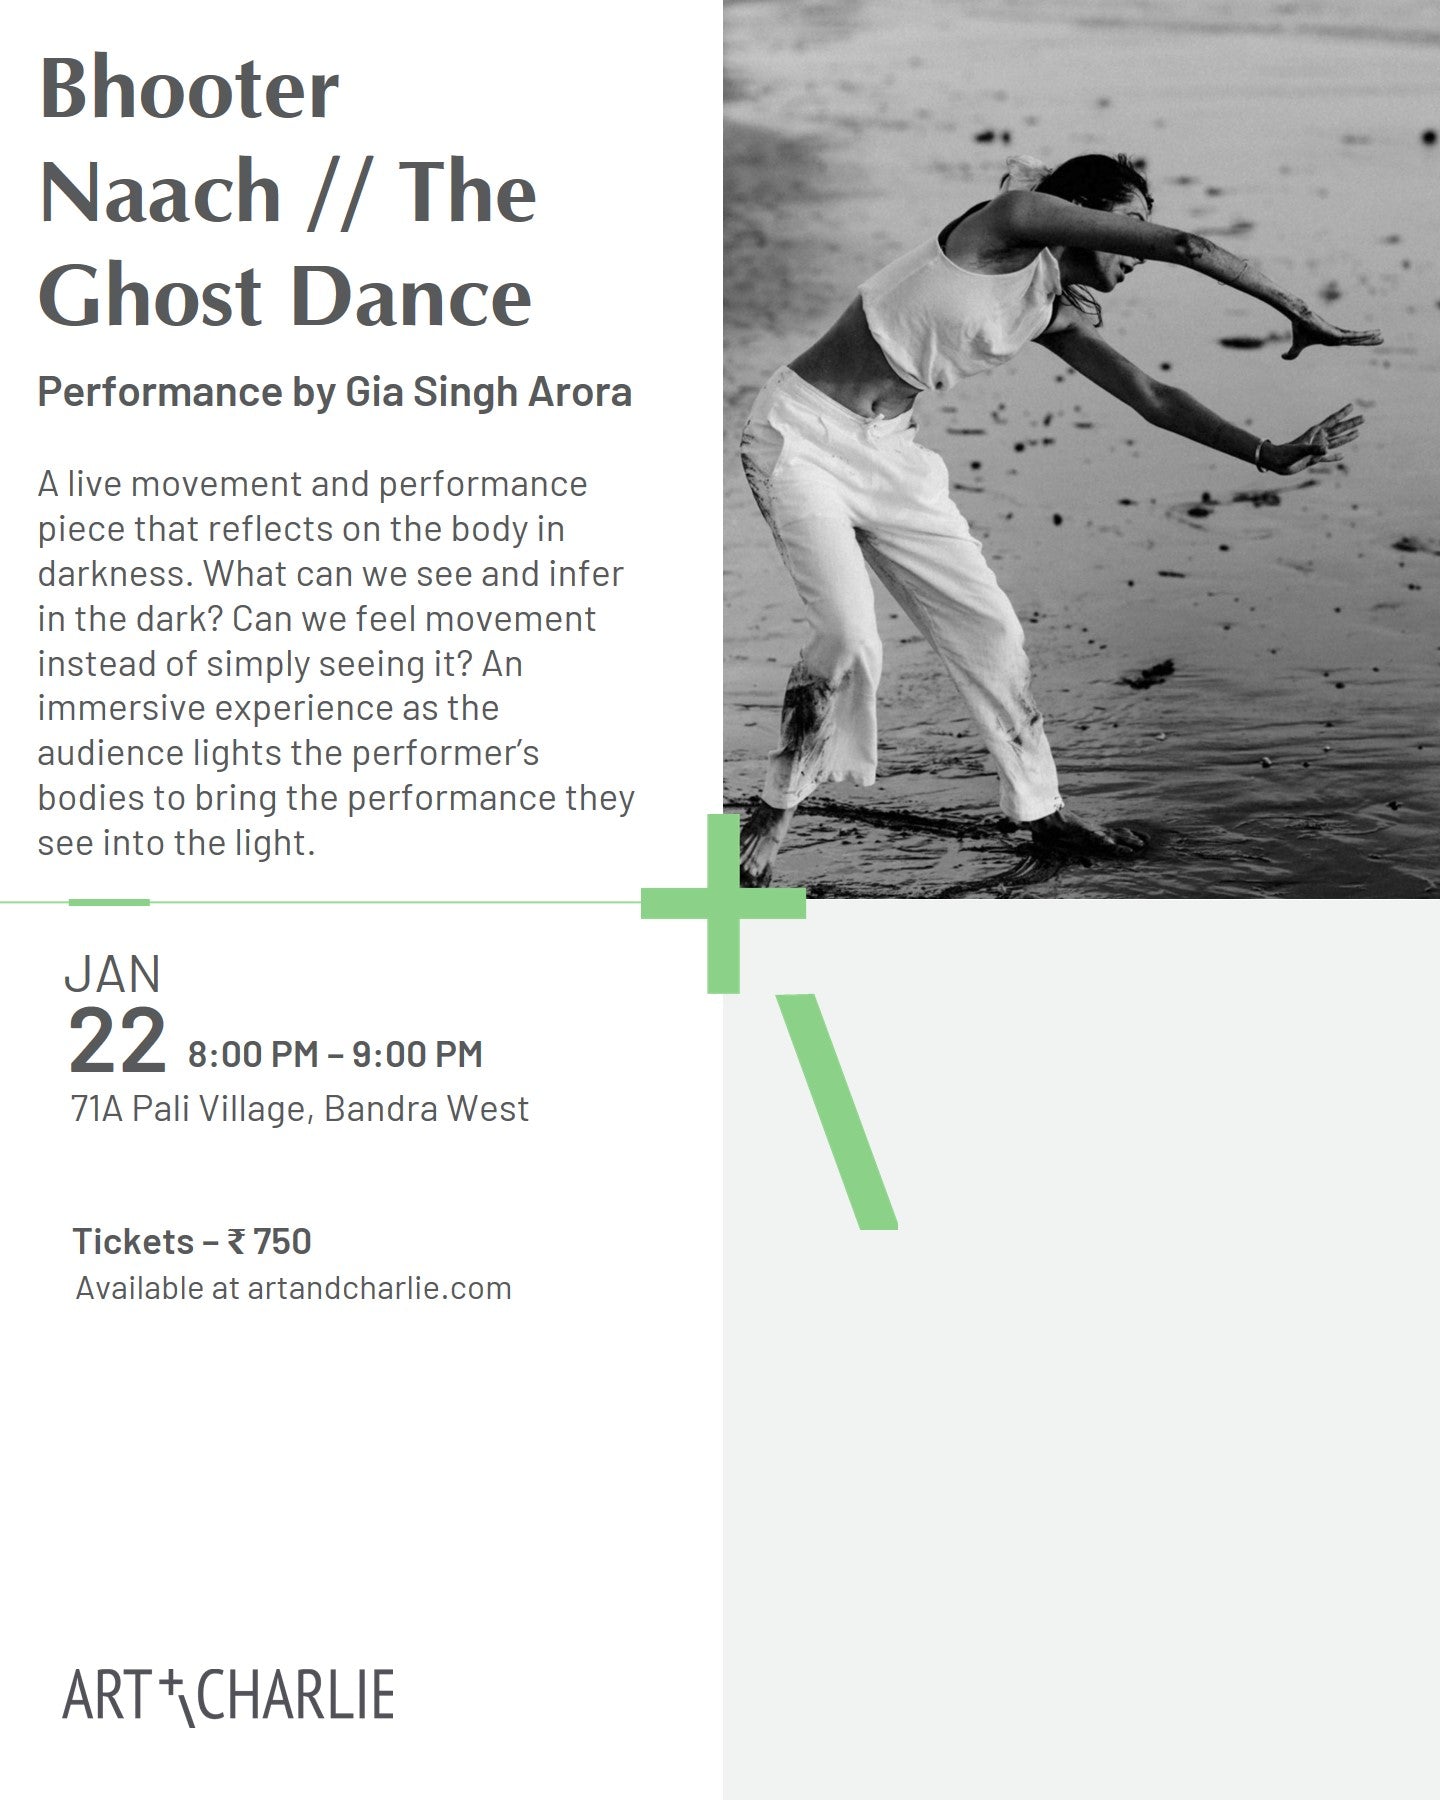 Ticket - Bhooter Naach // The Ghost Dance - 22 January - 8 PM